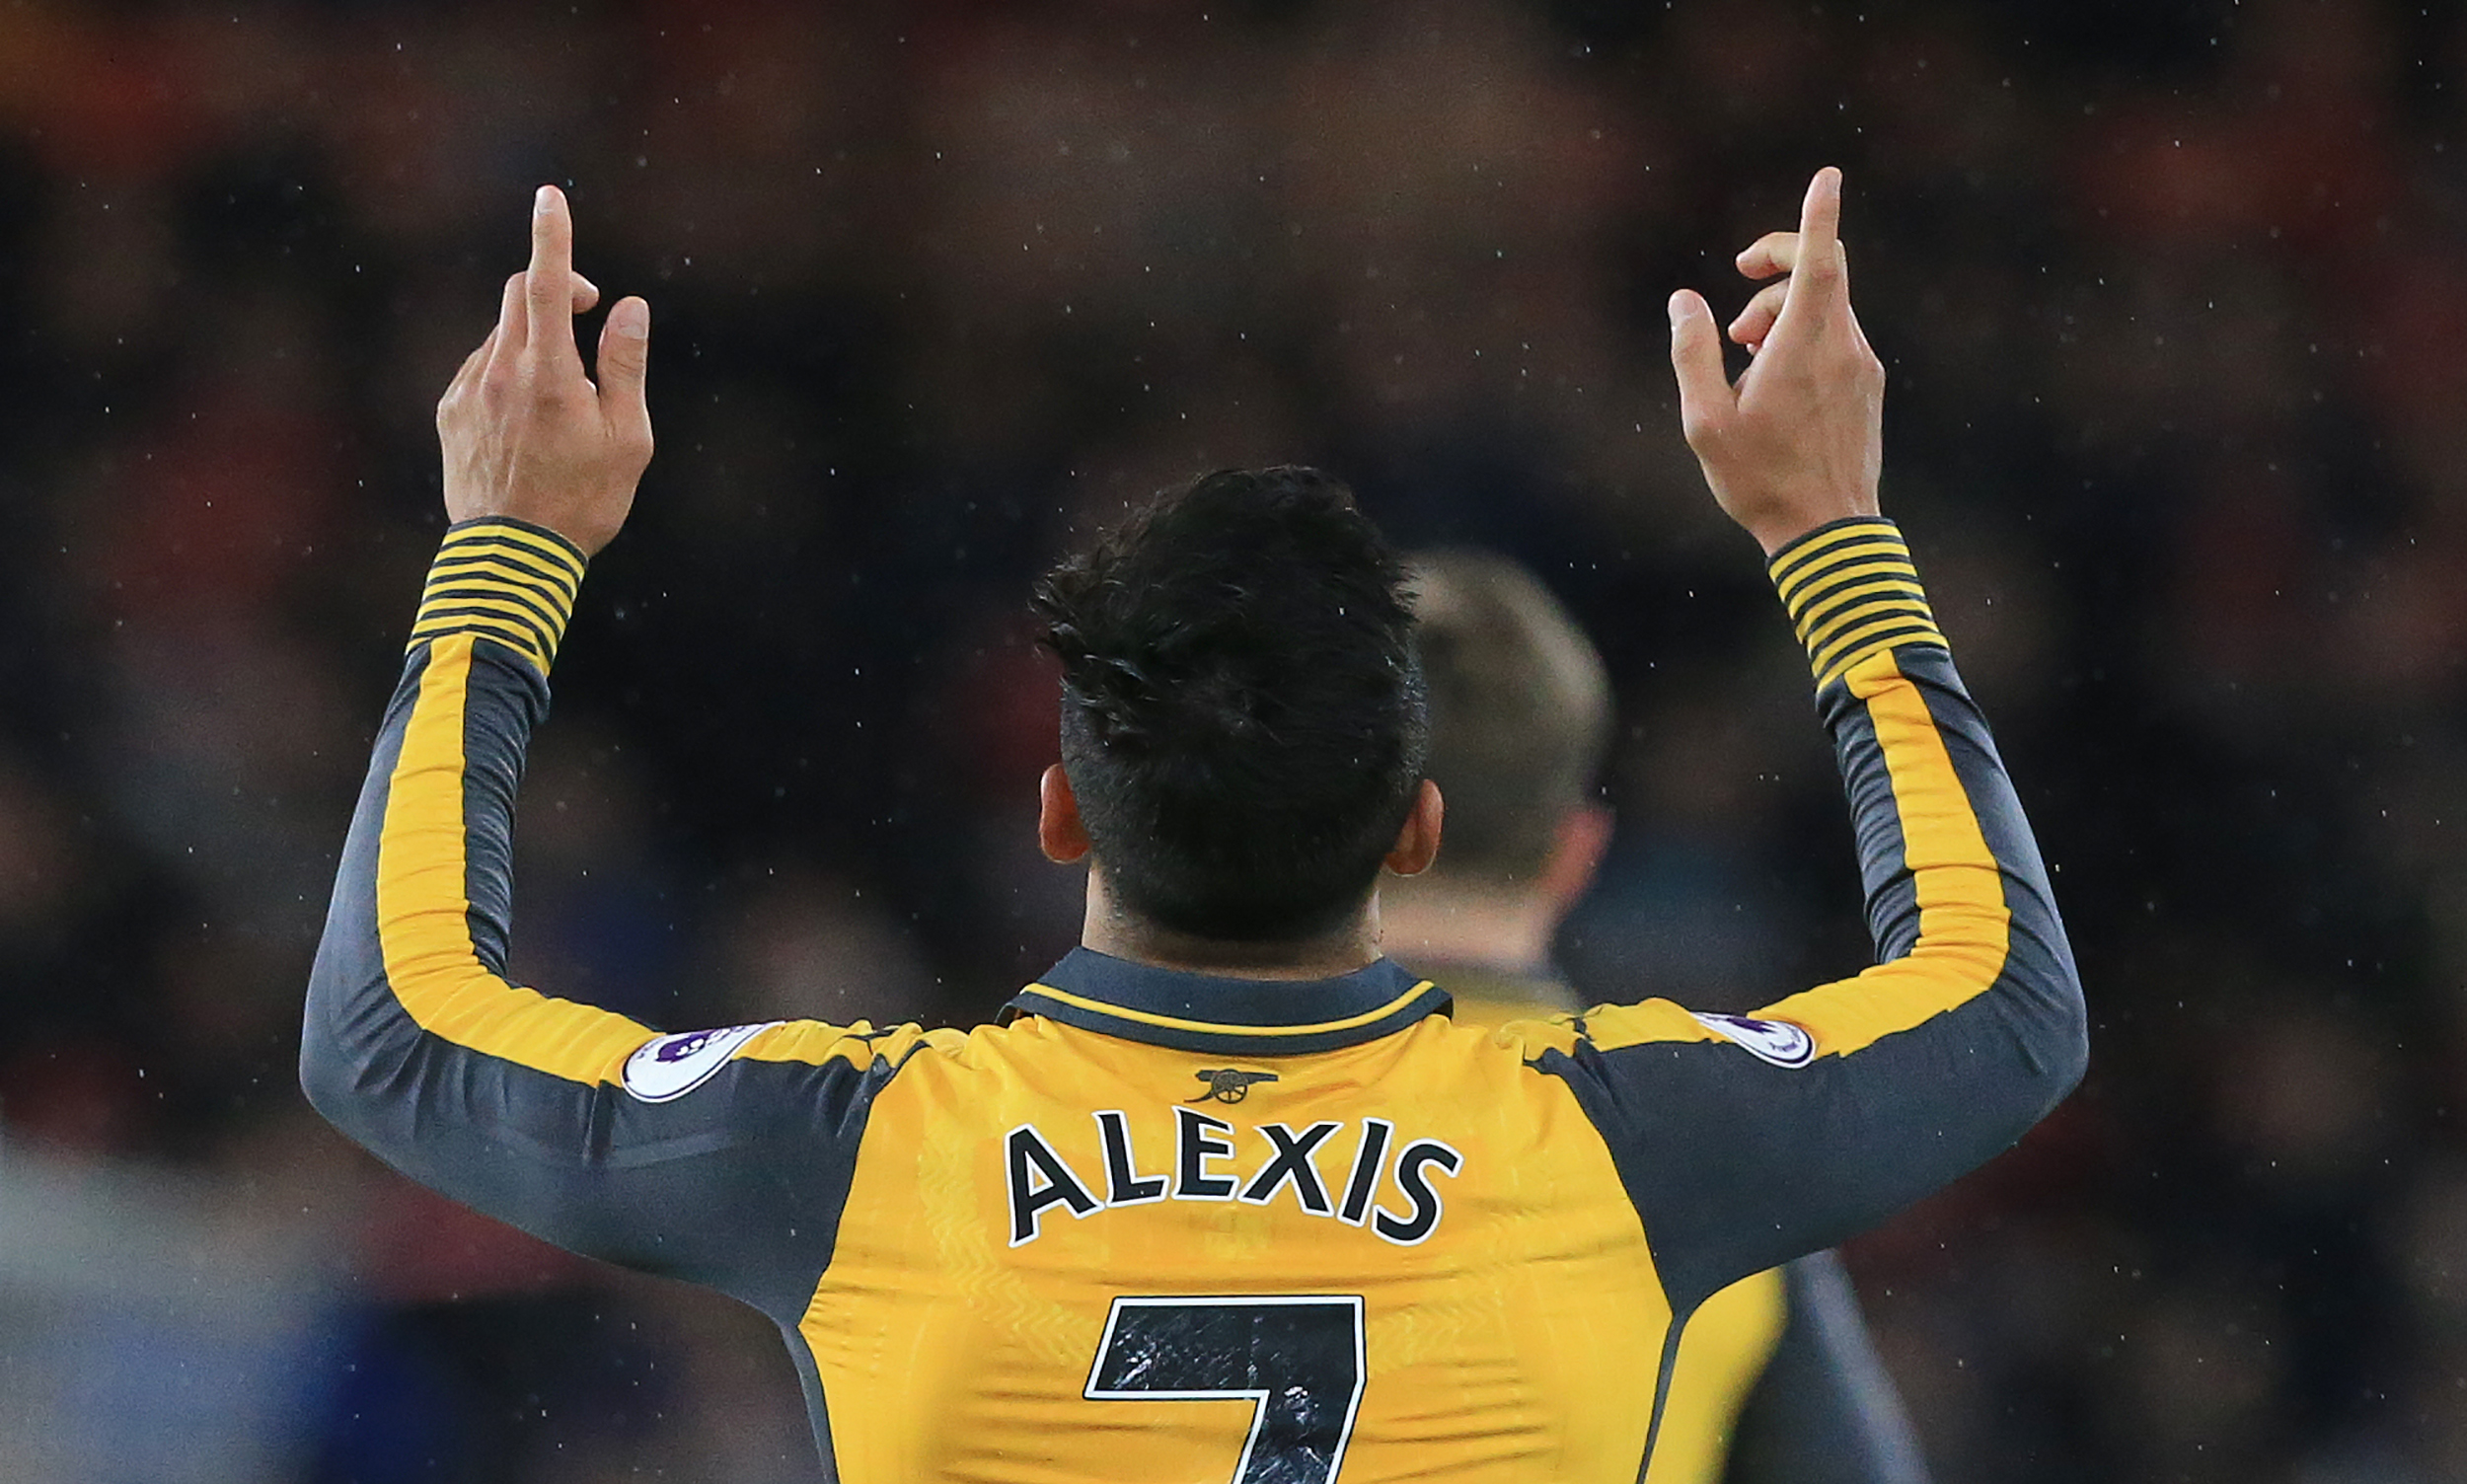 Arsenal's Chilean striker Alexis Sanchez celebrates scoring his team's first goal during the English Premier League football match between Middlesbrough and Arsenal at Riverside Stadium in Middlesbrough, northeast England on April 17, 2017. / AFP PHOTO / Lindsey PARNABY / RESTRICTED TO EDITORIAL USE. No use with unauthorized audio, video, data, fixture lists, club/league logos or 'live' services. Online in-match use limited to 75 images, no video emulation. No use in betting, games or single club/league/player publications.  /         (Photo credit should read LINDSEY PARNABY/AFP/Getty Images)